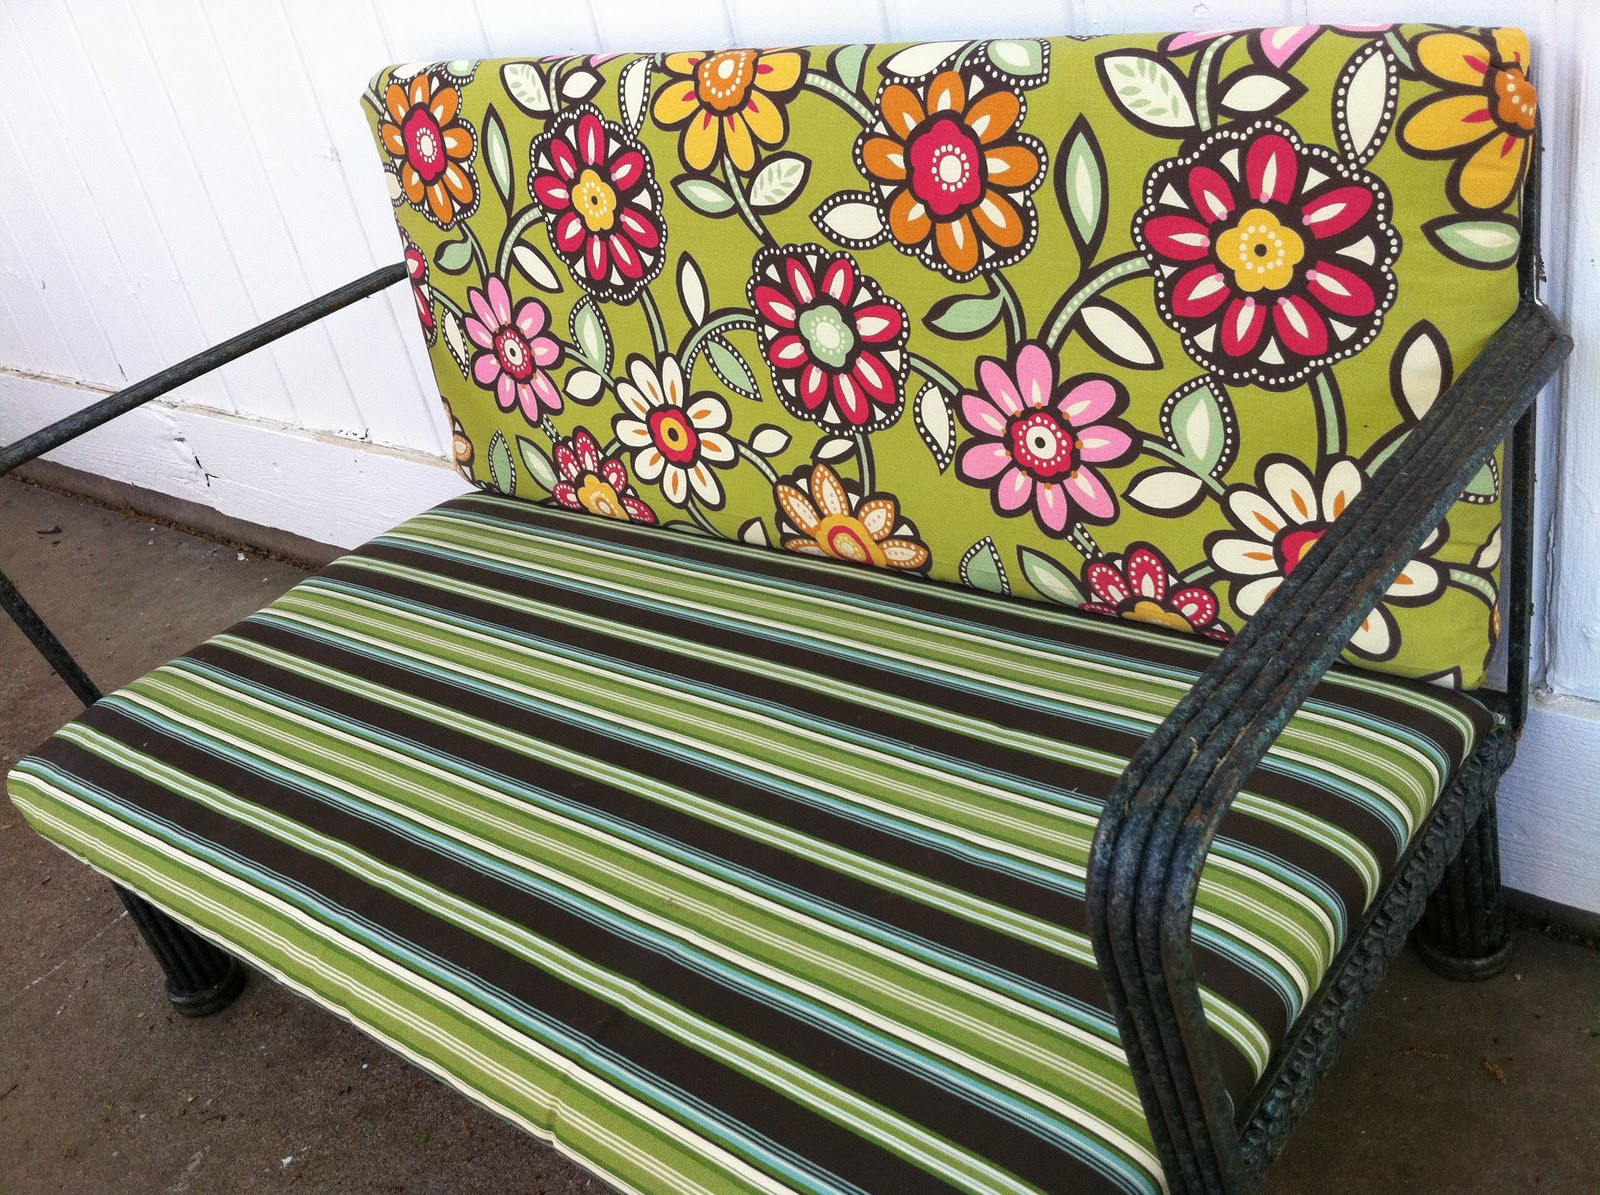 DIY Outdoor Cushions No Sew
 Naptime = Craft time No sew Patio Furniture Cushion Re do